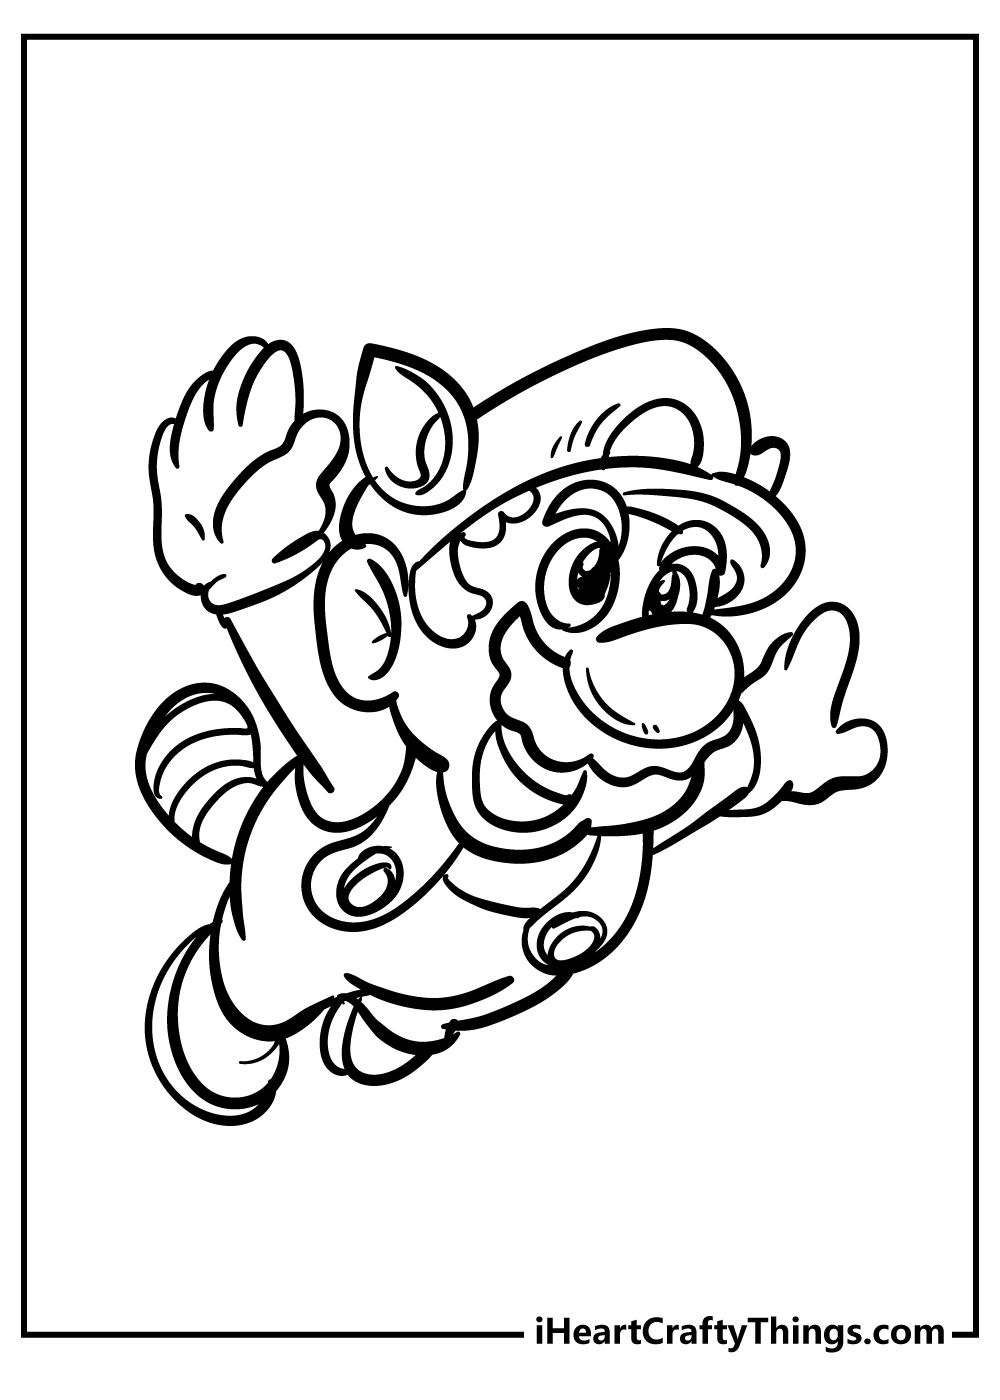 New and exciting super mario bros coloring pages super mario coloring pages mario coloring pages free coloring pages